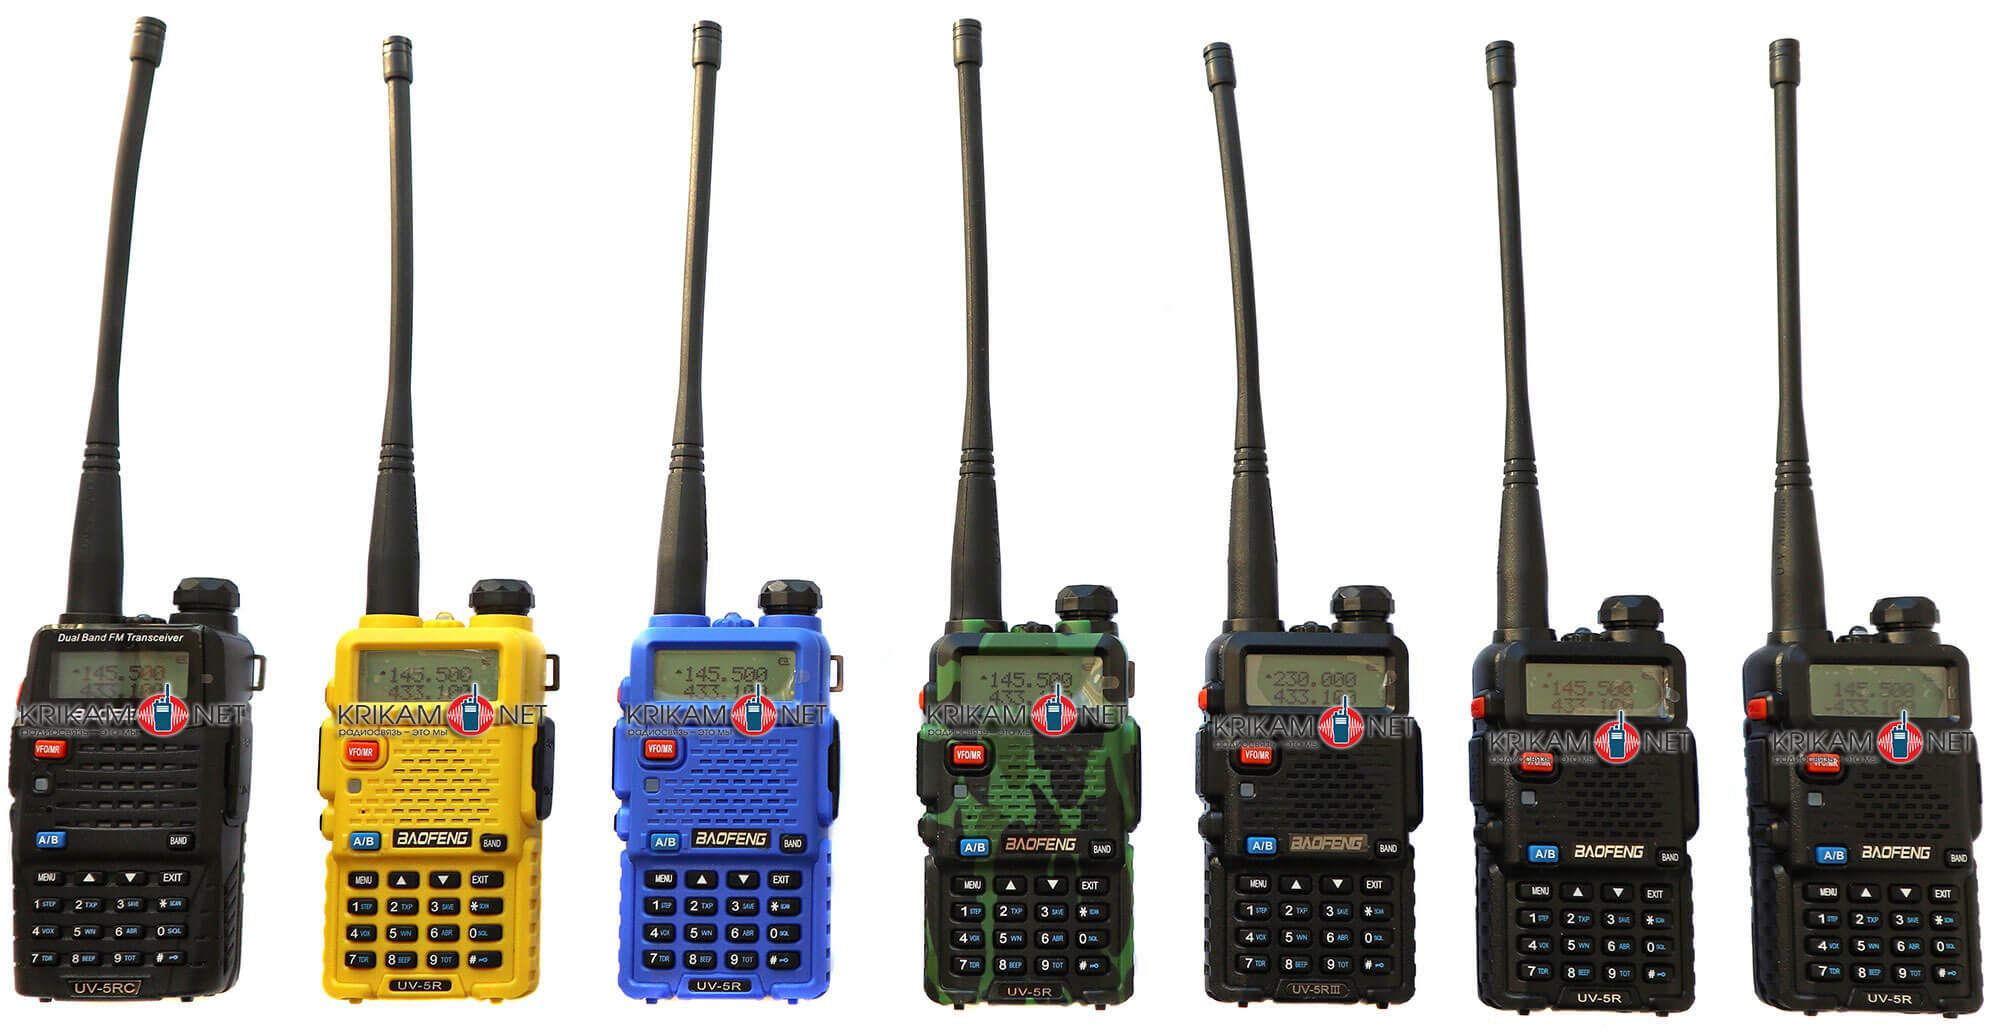 https://punisher.com.ua/content/uploads/images/baofeng-uv-5r-walkie-talkie-review-which-one-to-choose/baofeng-uv-5r-walkie-talkie-review.jpg